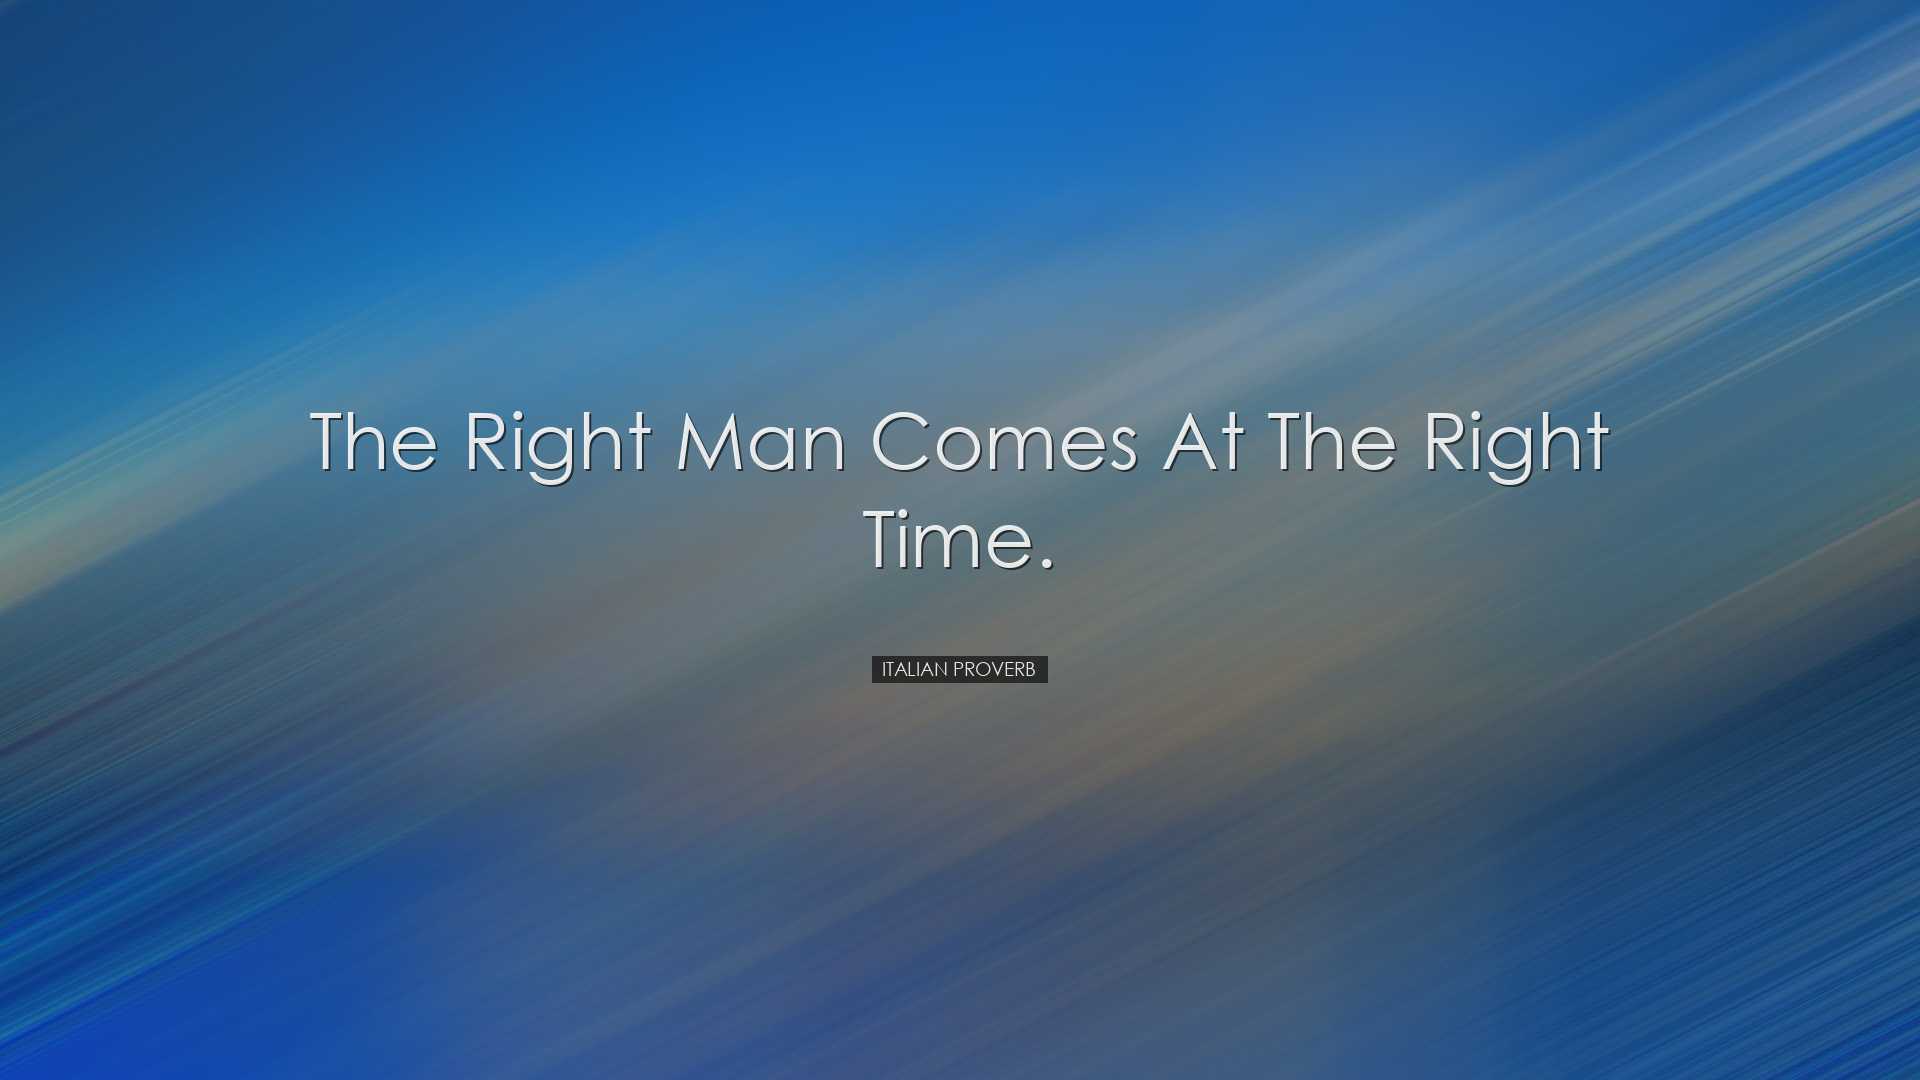 The right man comes at the right time. - Italian Proverb